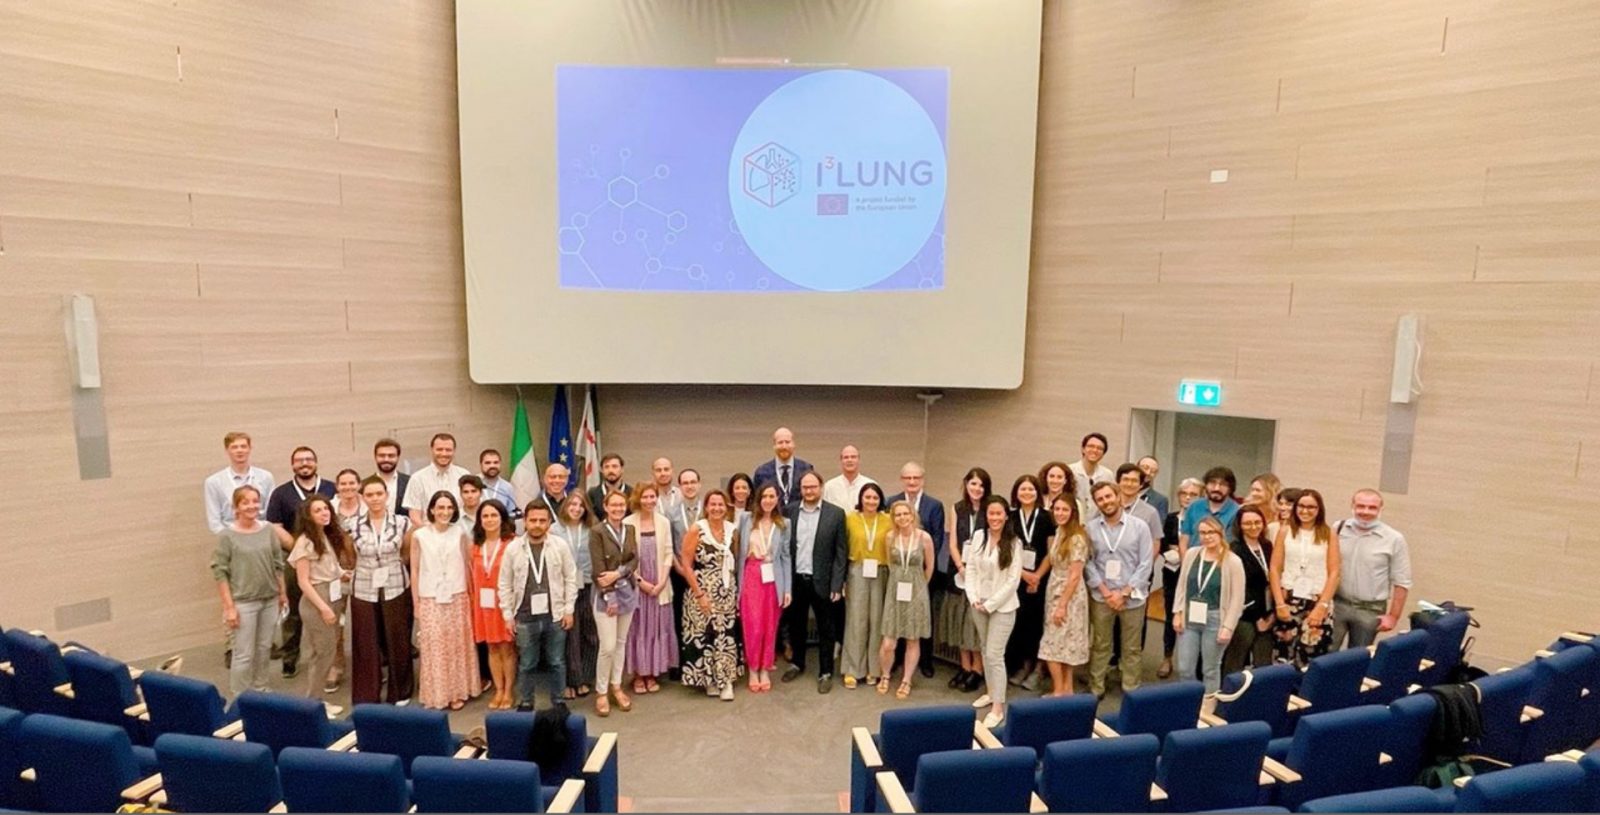 (1/3) The I3LUNG European project has officially started!